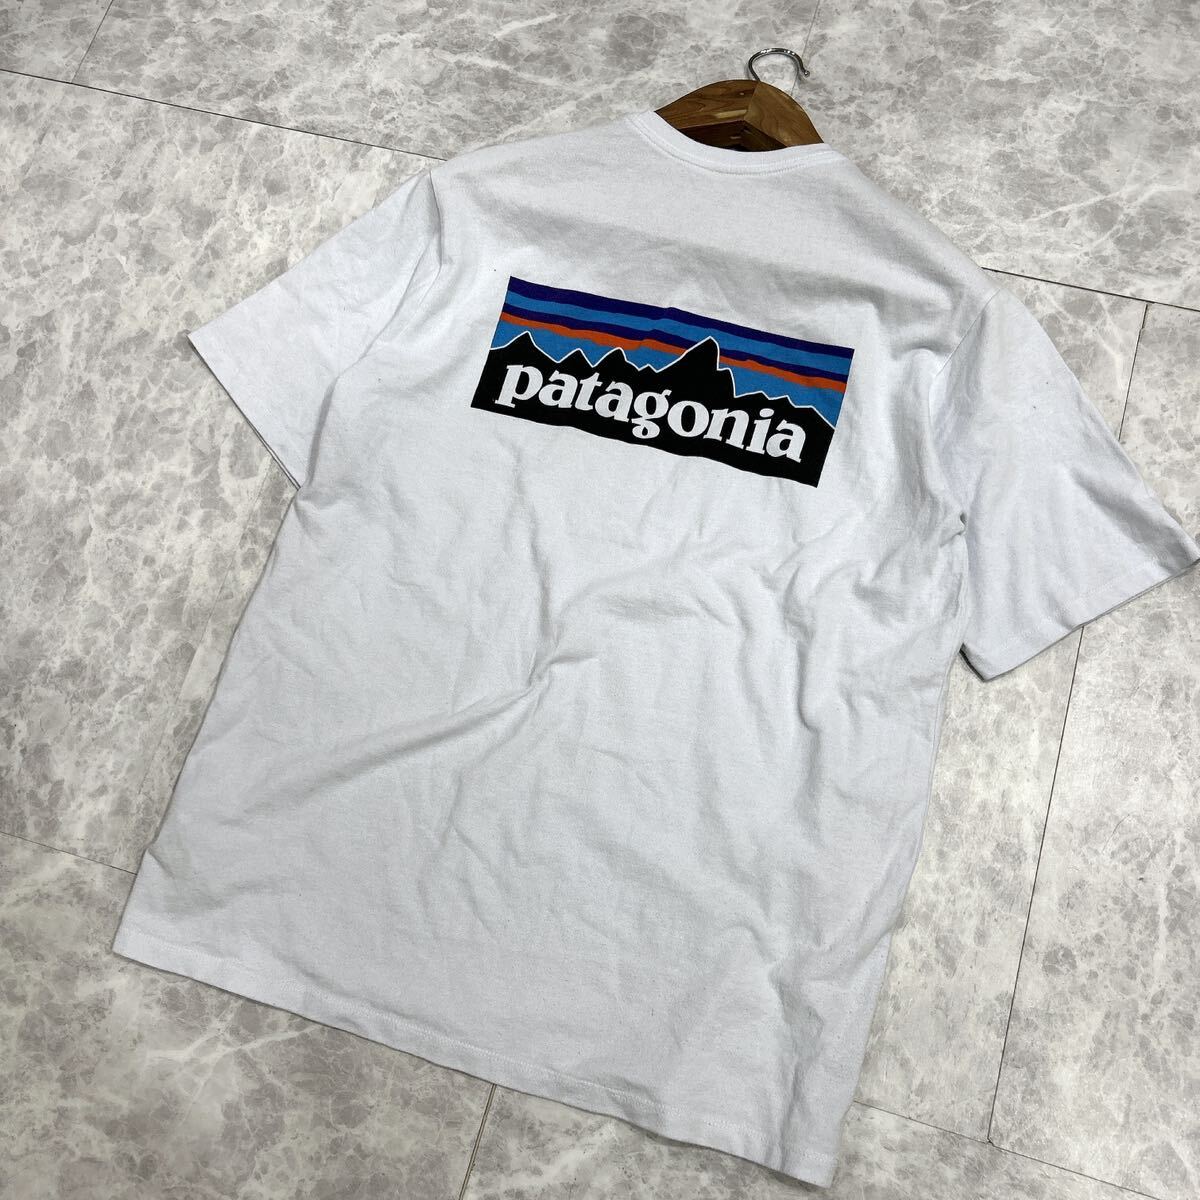 DD # Mexico made \' popular model \' Patagonia Patagonia short sleeves with logo T-shirt / cut and sewn sizeM comfortable eminent men's gentleman clothes tops 